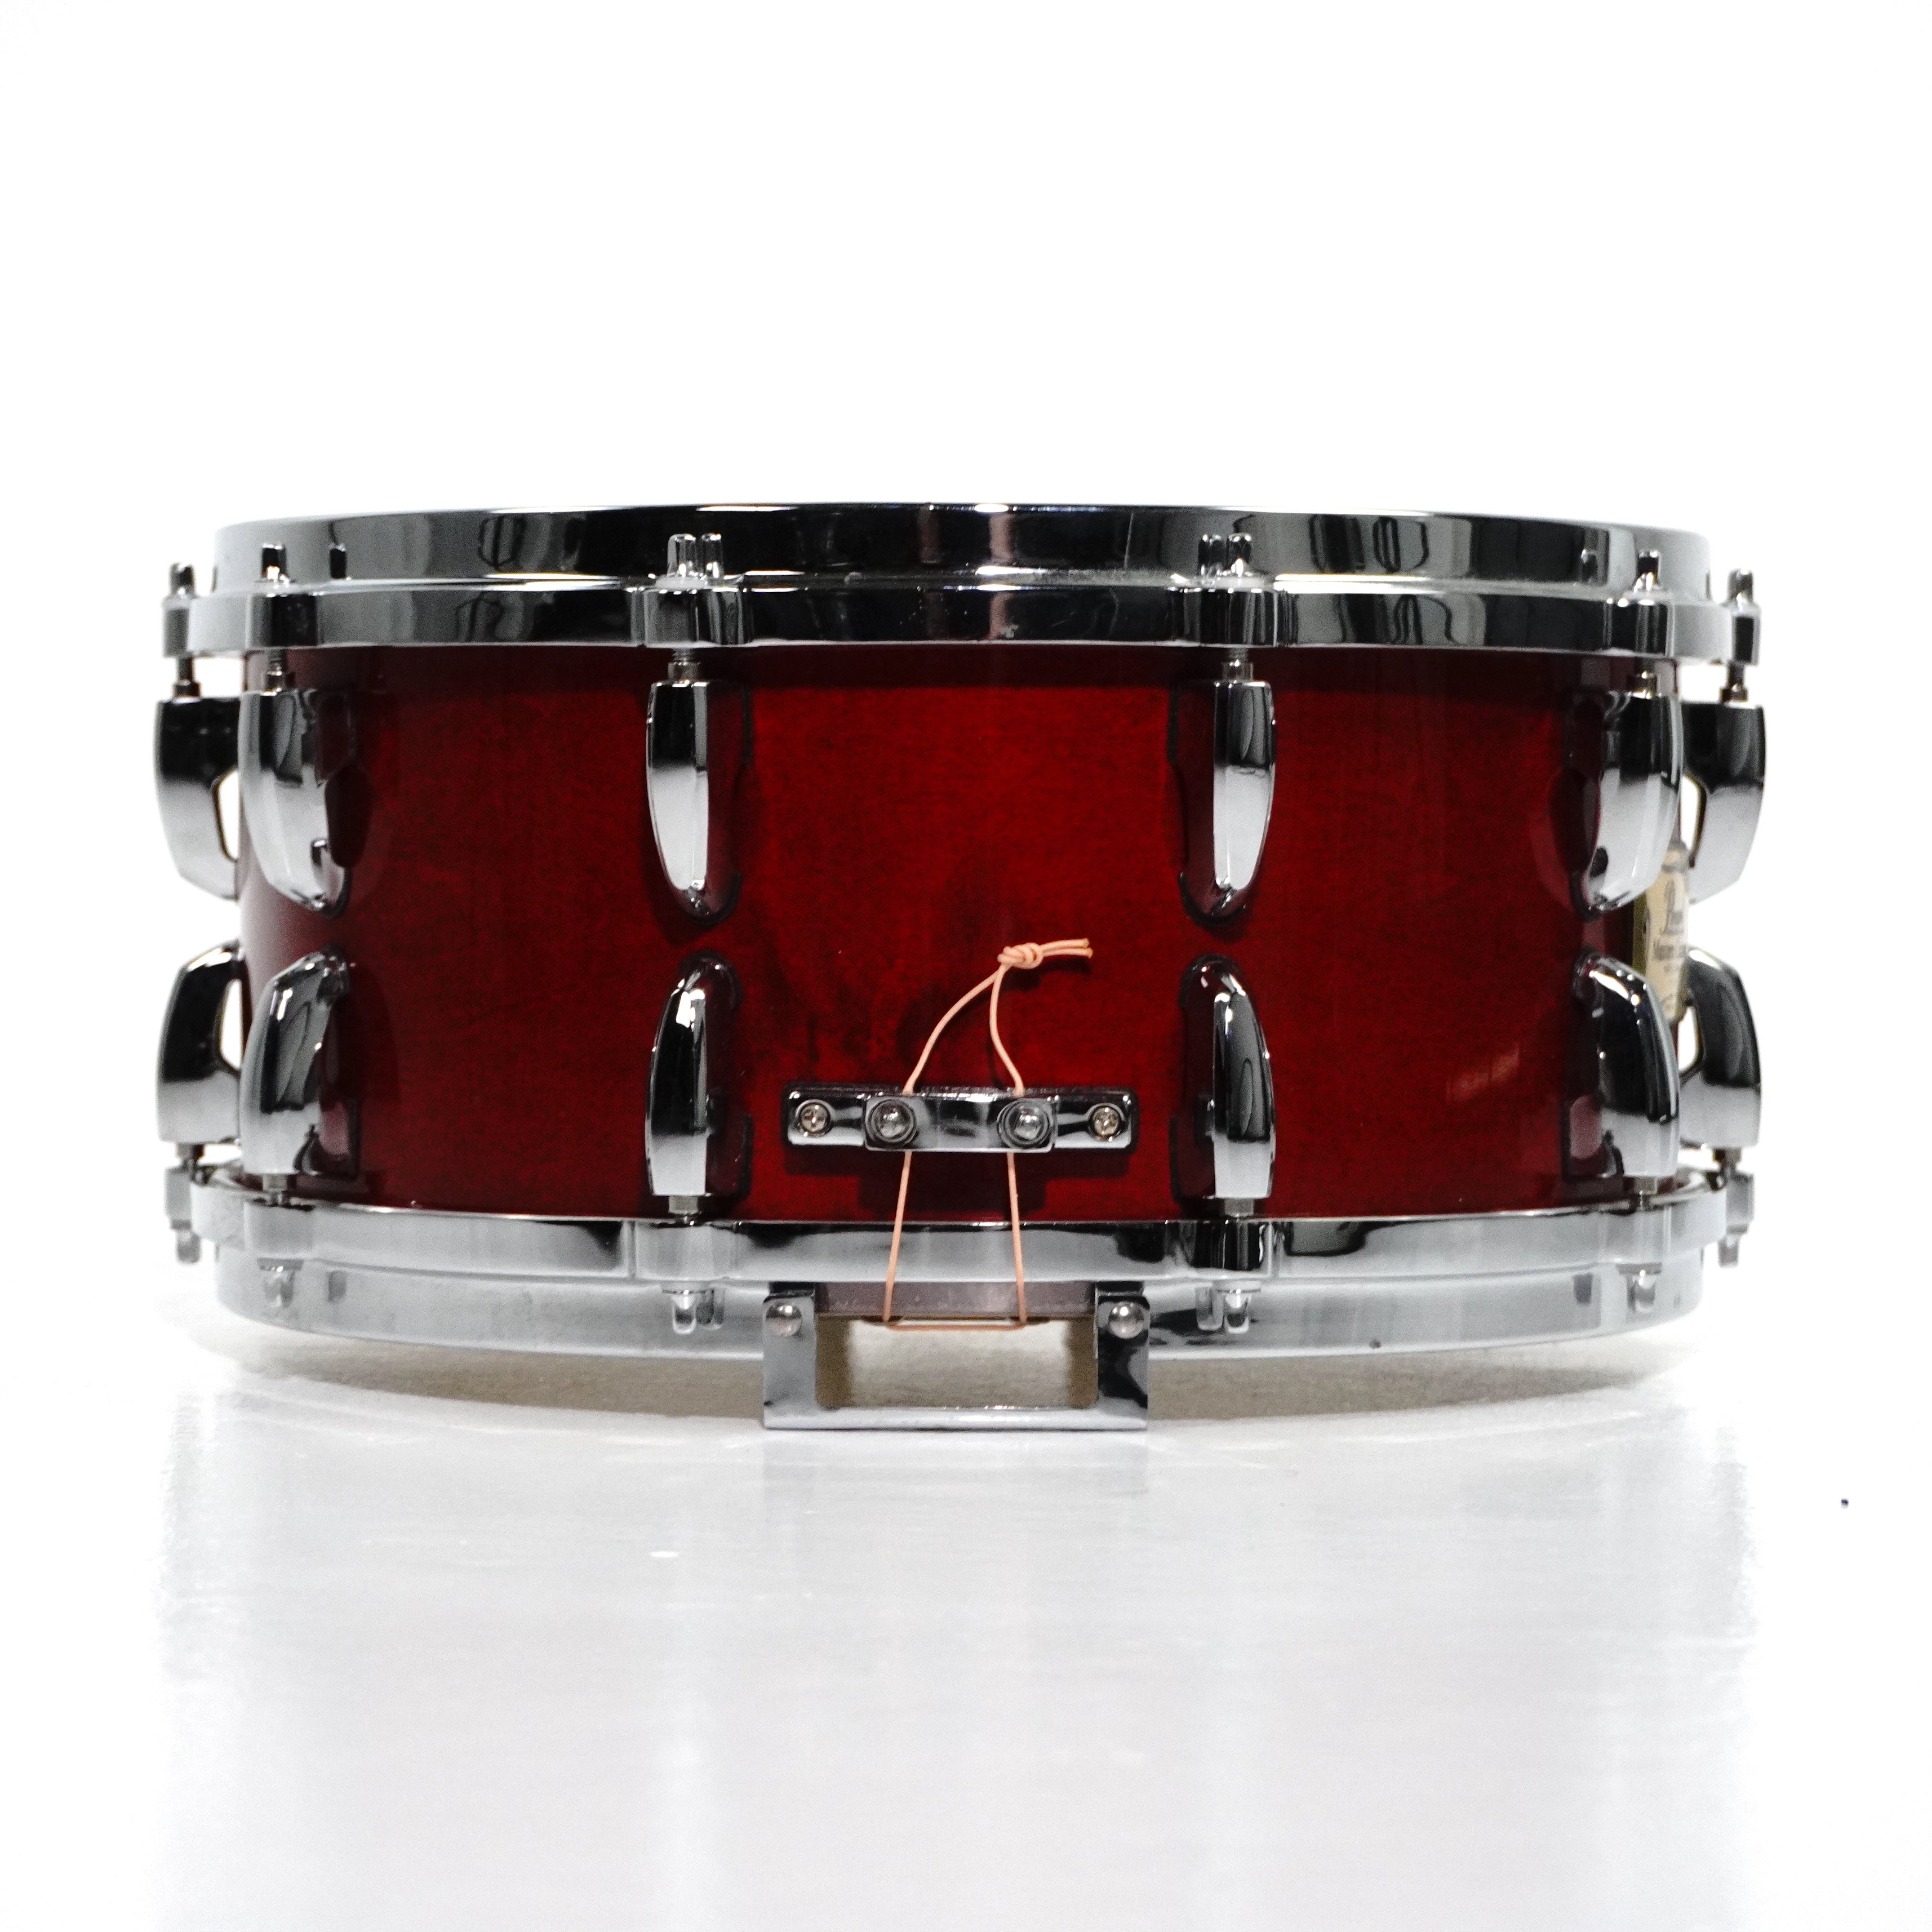 Pearl Masters Custom 14” x 6.5” Maple Shell Snare Drum in Sequoia